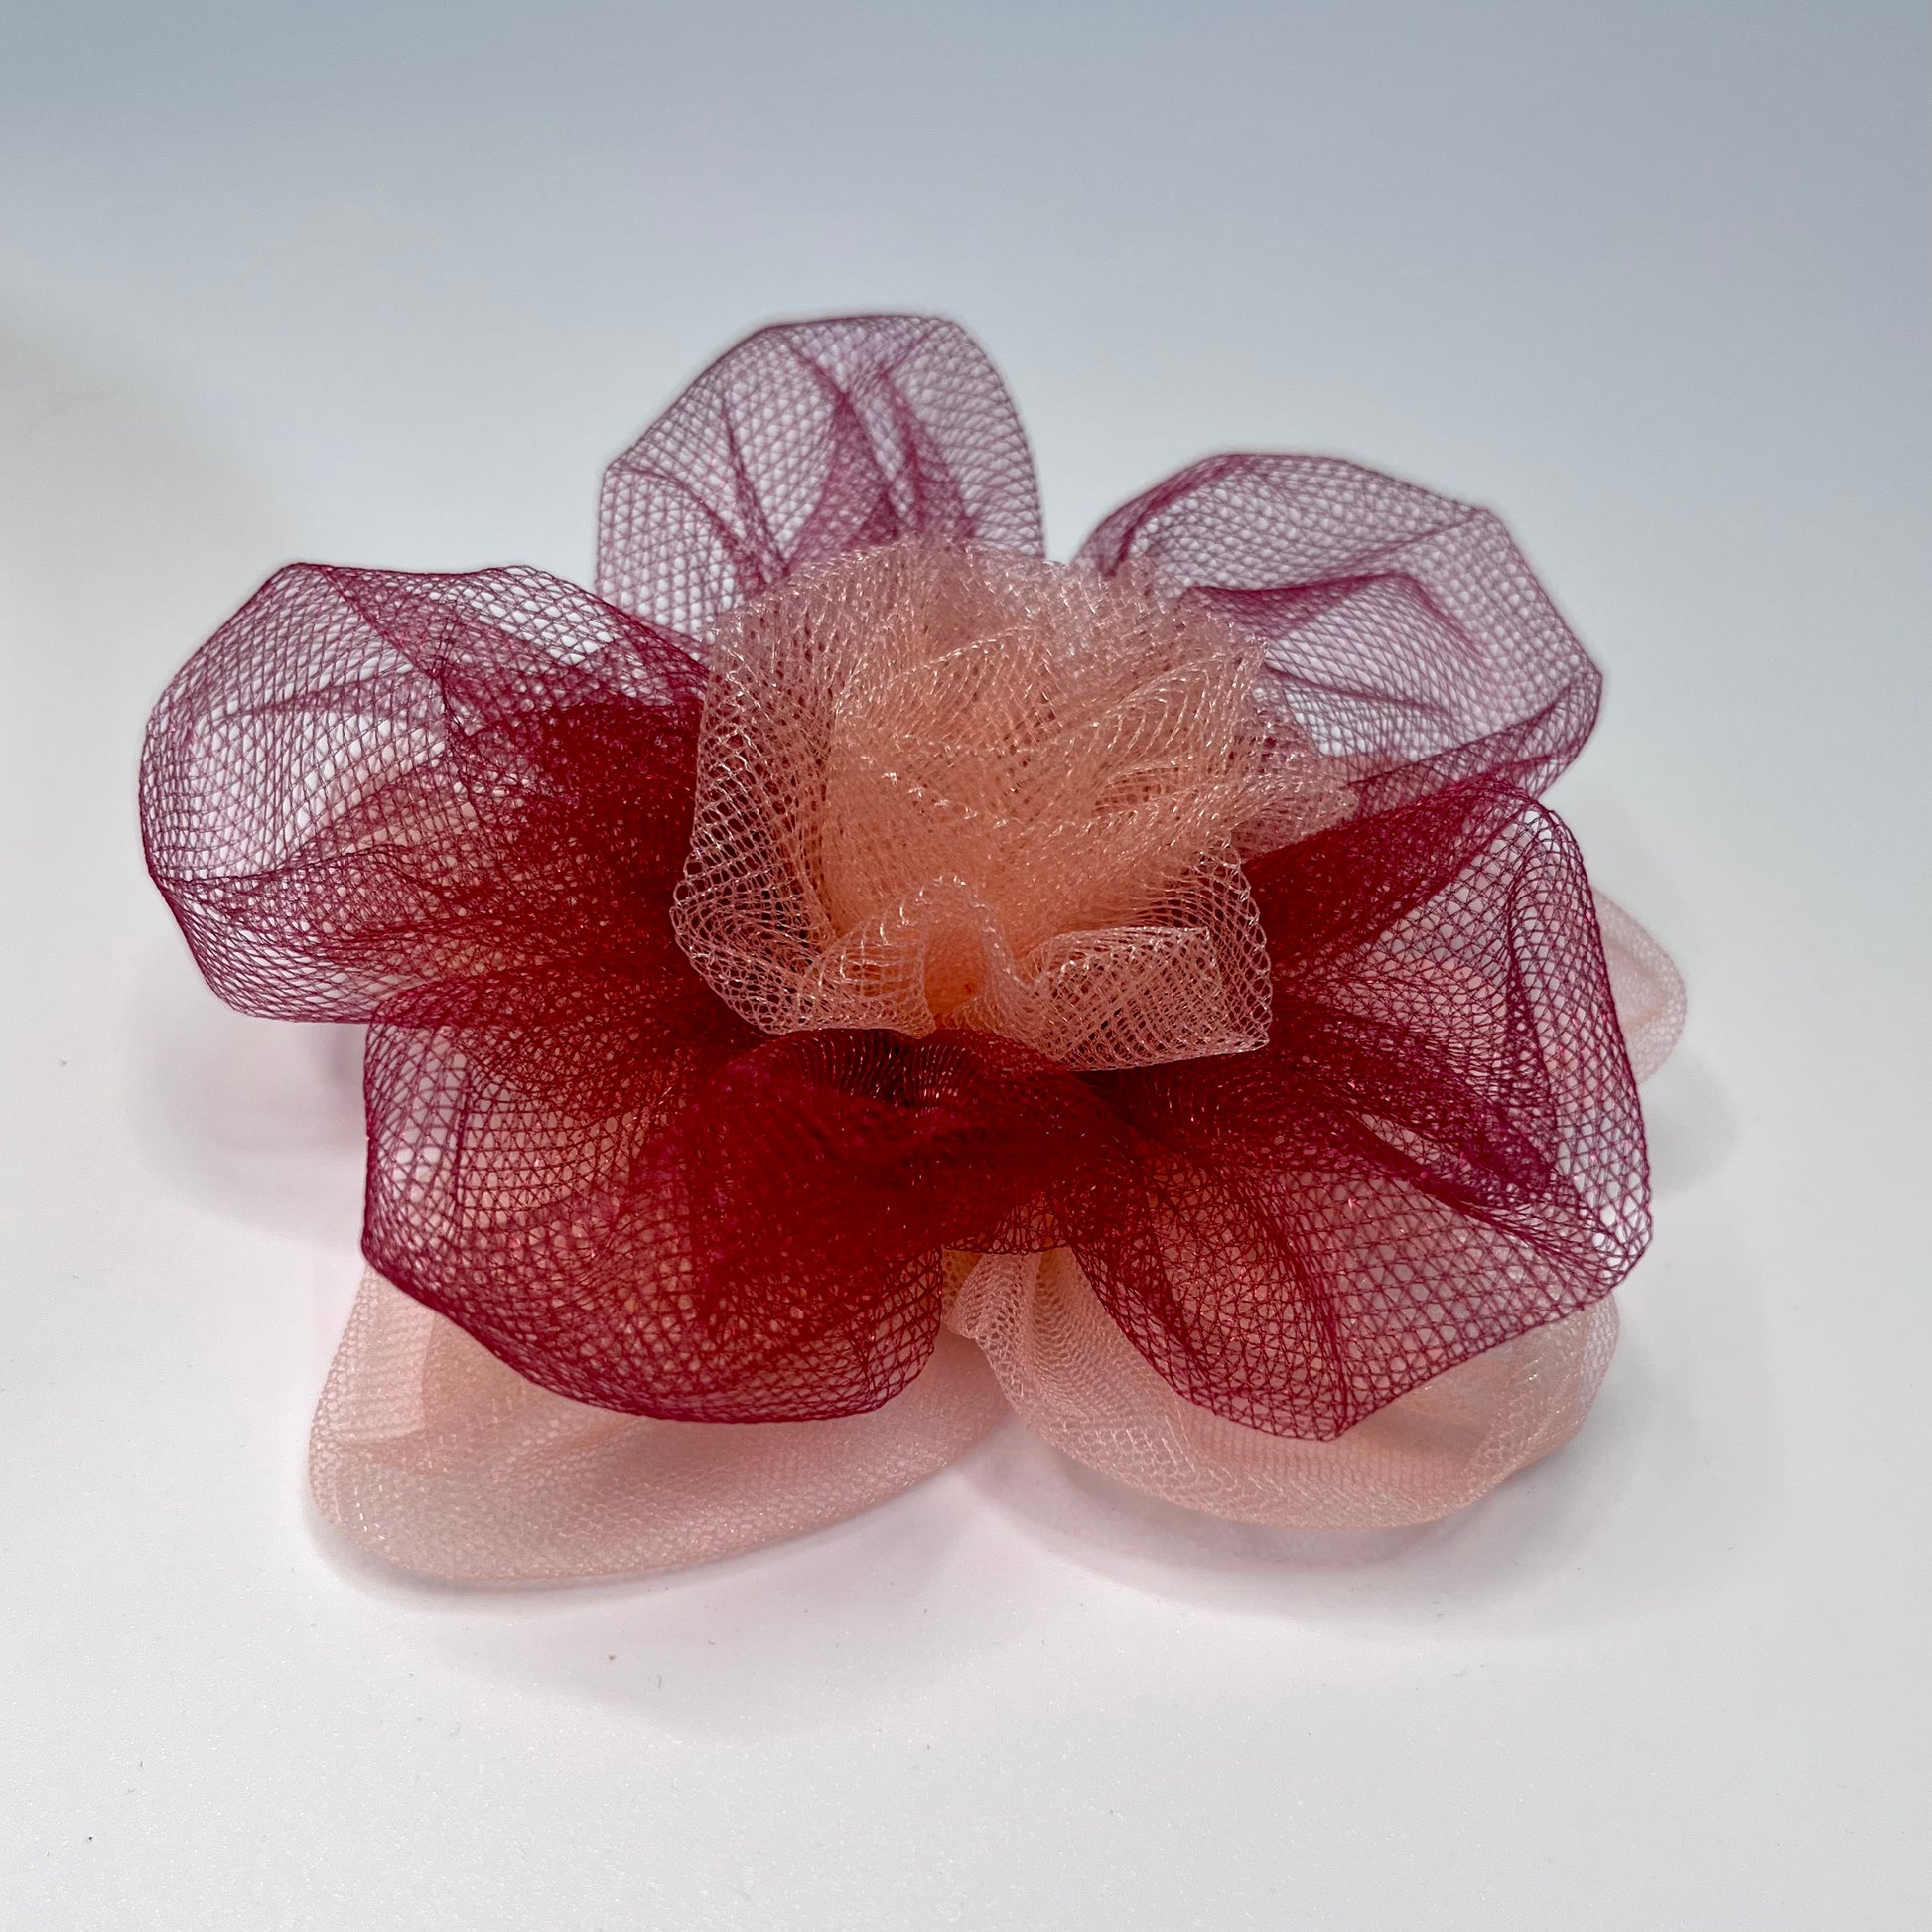 Peach and Maroon Flower Fascinator Hat | Floral Hair Accessory